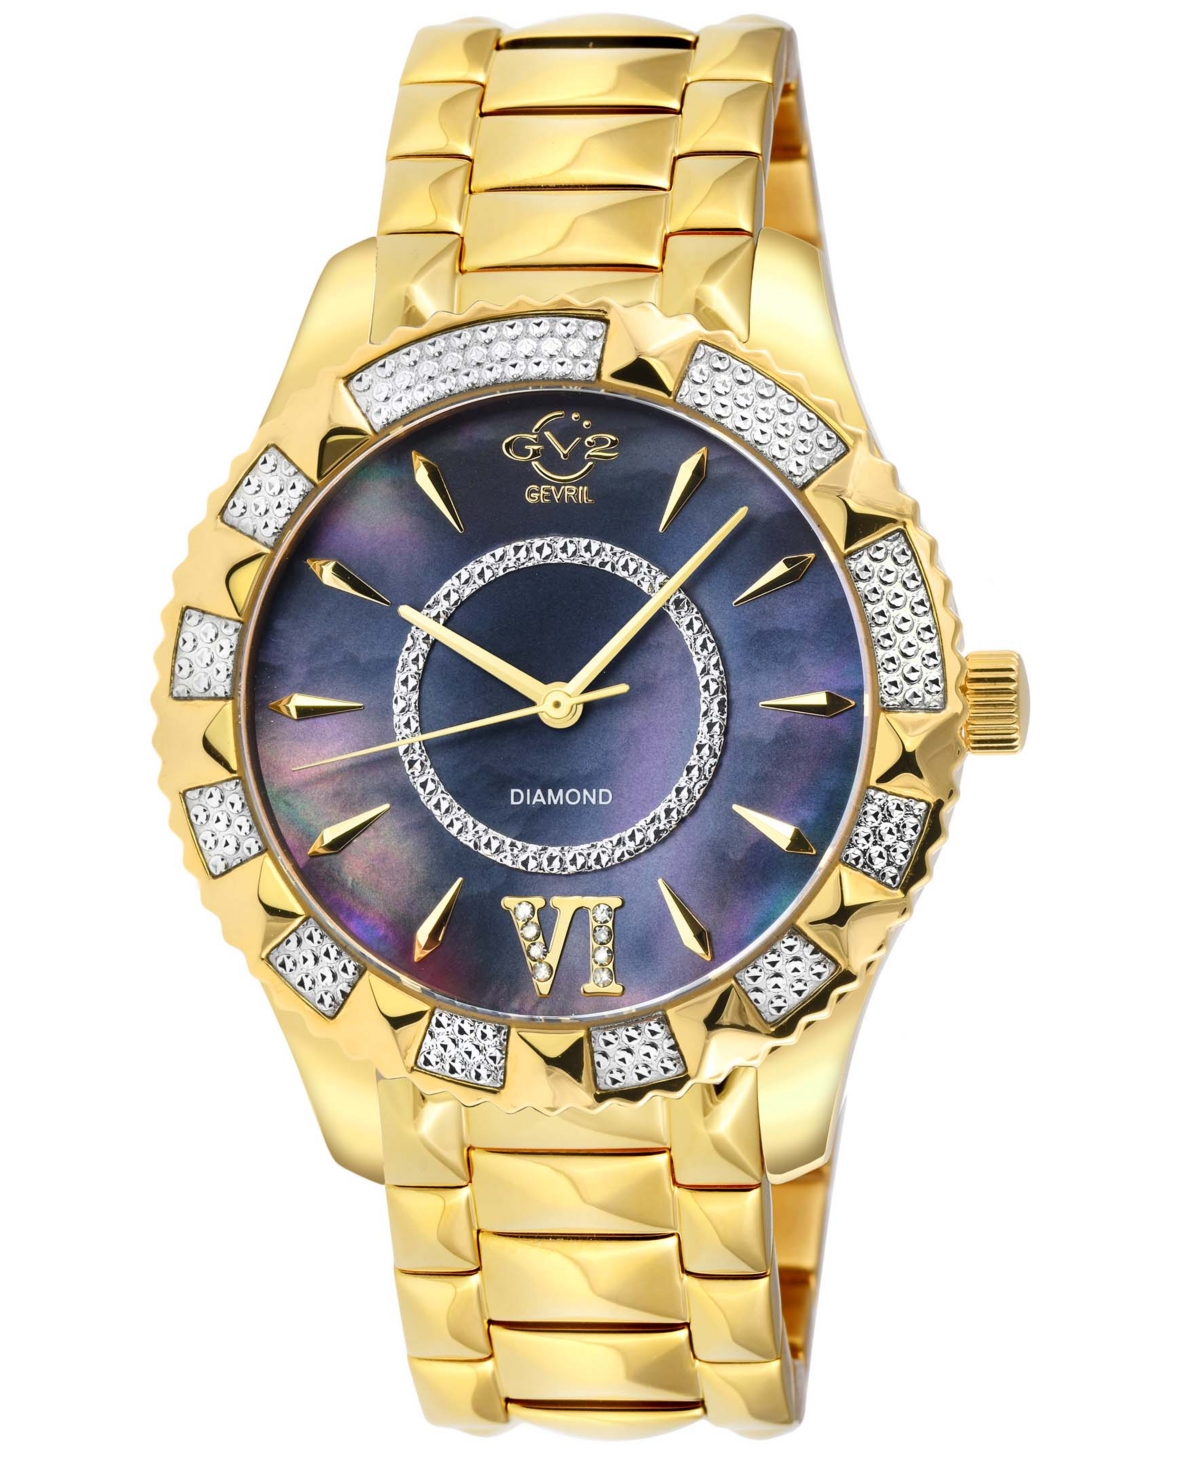 Gv2 By Gevril Women's Venice Swiss Quartz Gold-tone Stainless Steel Watch 38mm